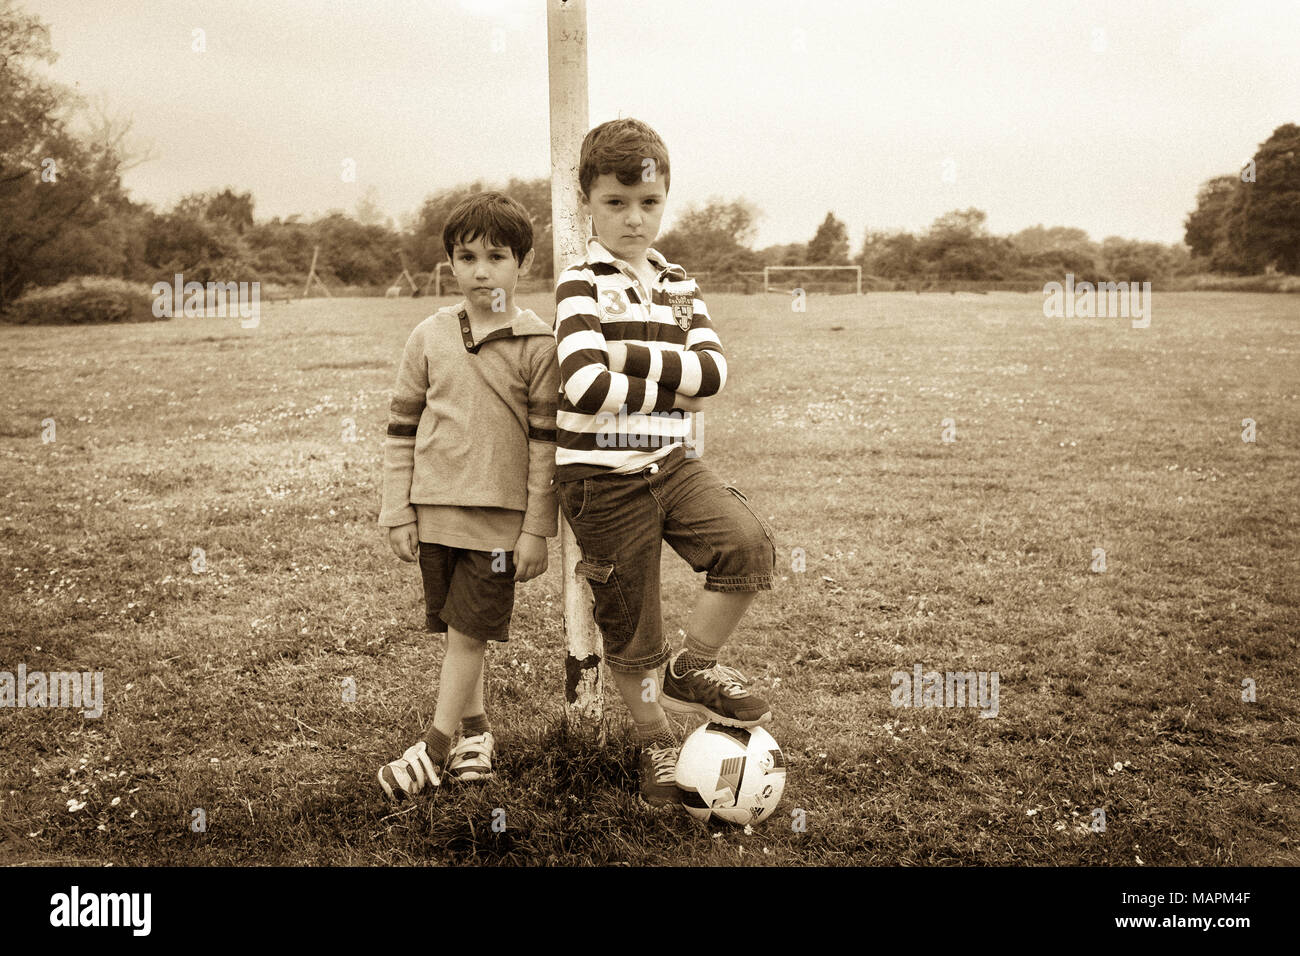 Two young boys with football leaning on goalpost in park Stock Photo